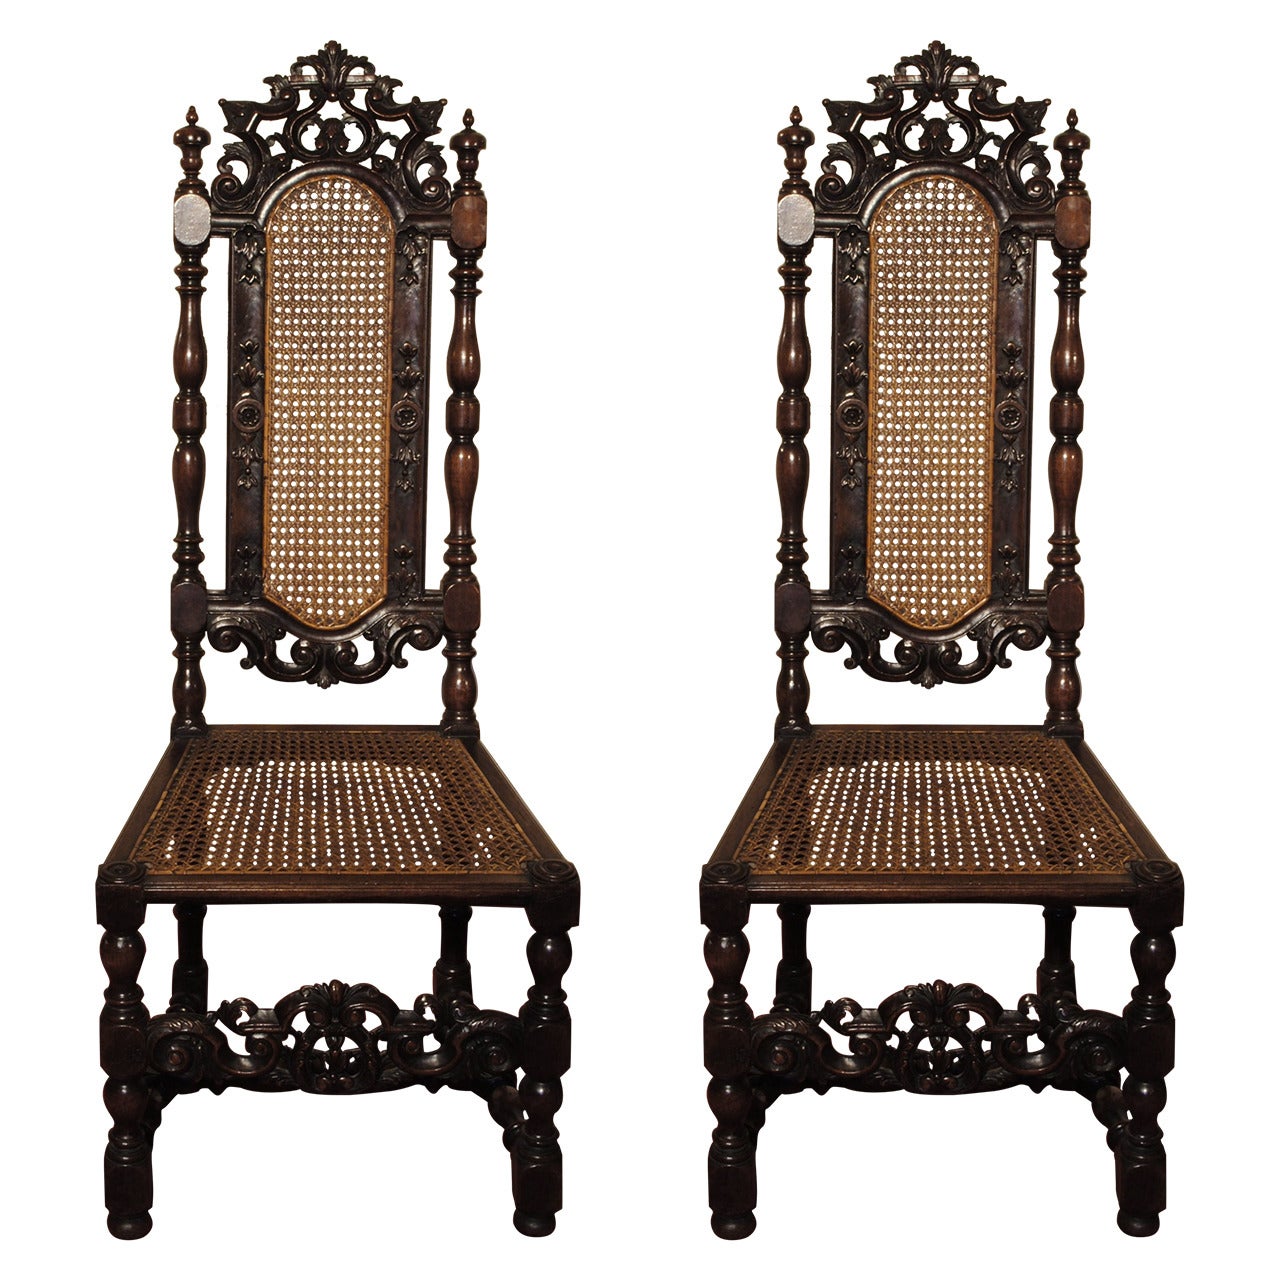 Pair of William and Mary walnut chairs